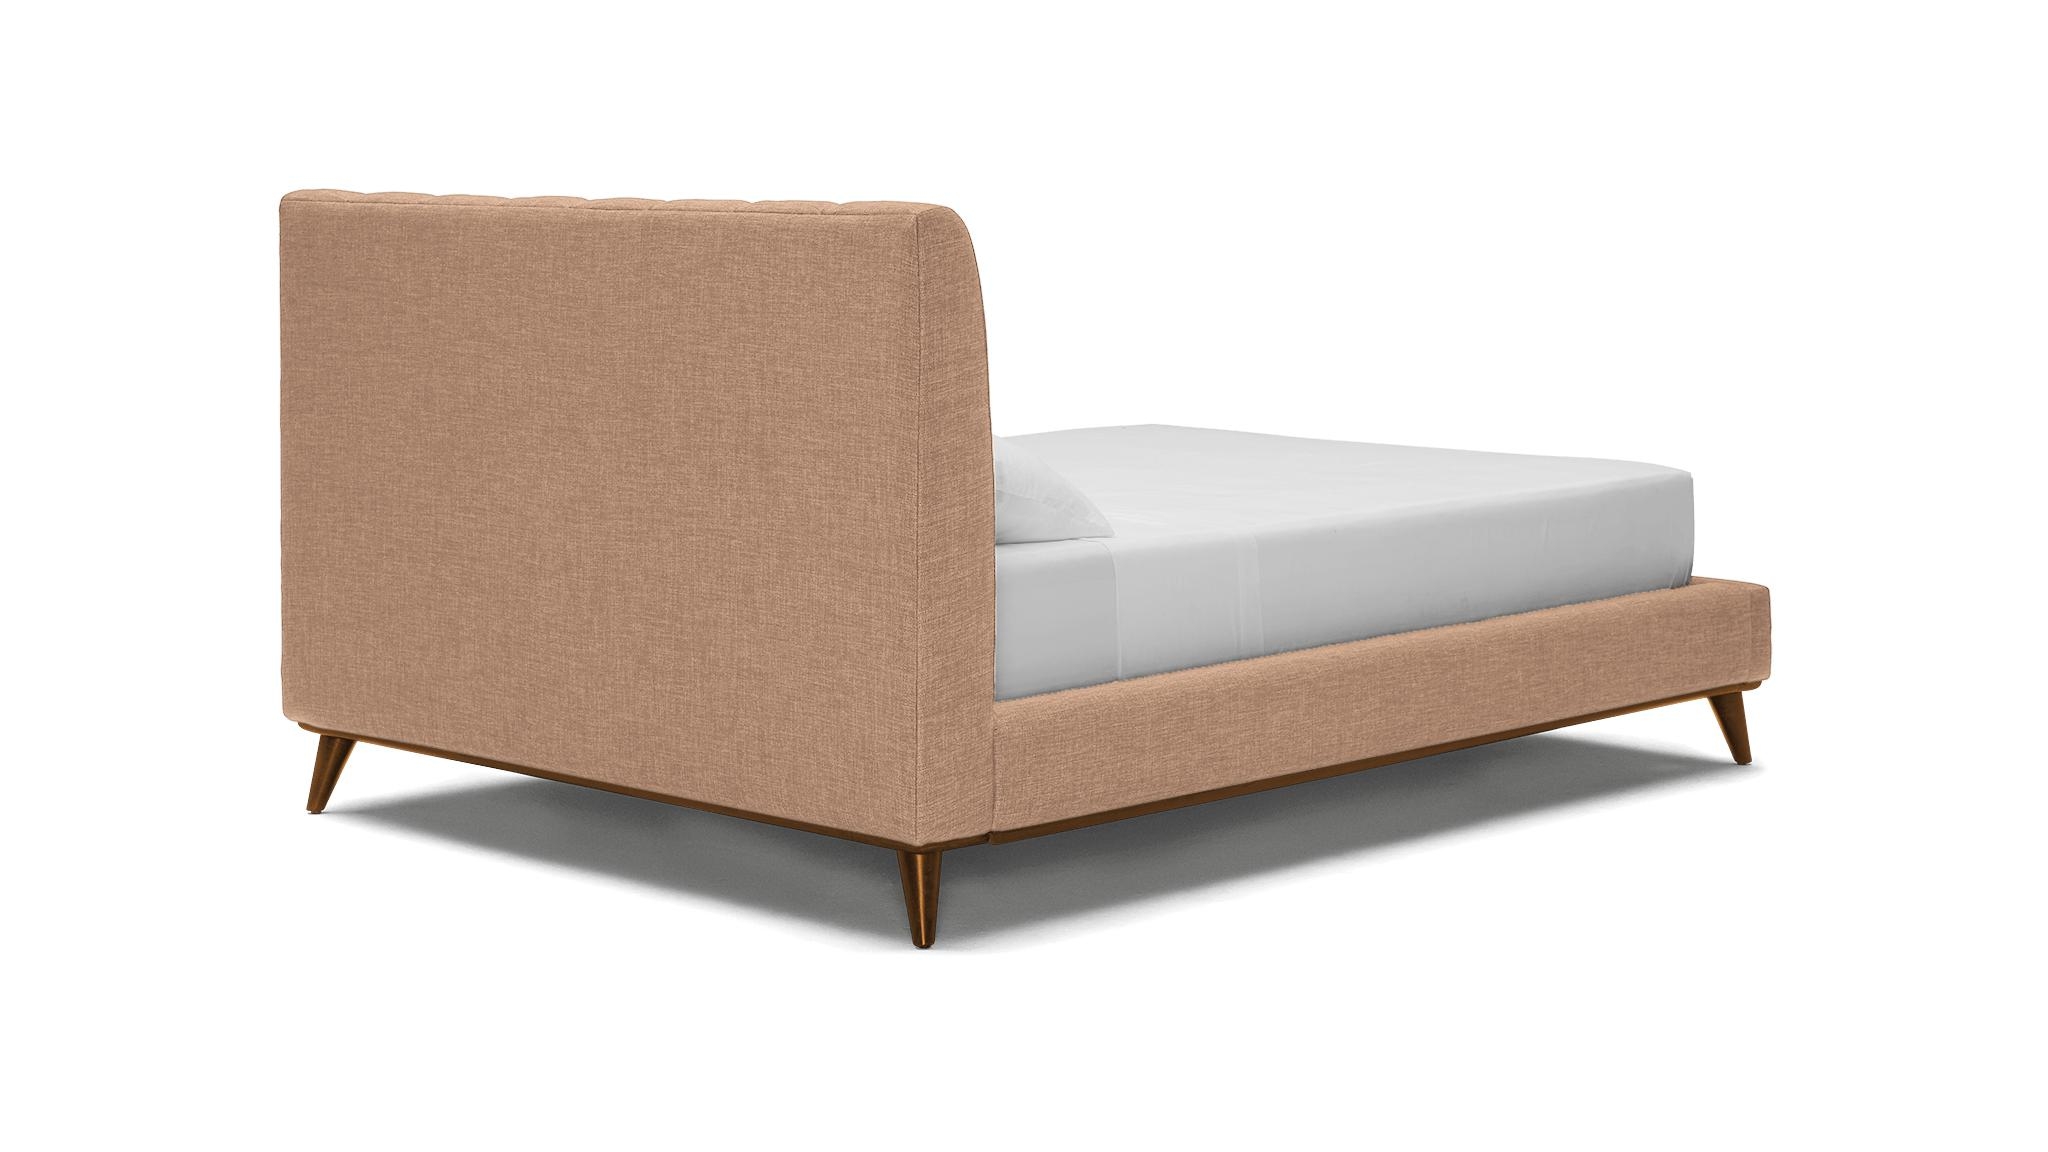 Pink Hughes Mid Century Modern Bed - Royale Blush - Mocha - Queen - Image 3